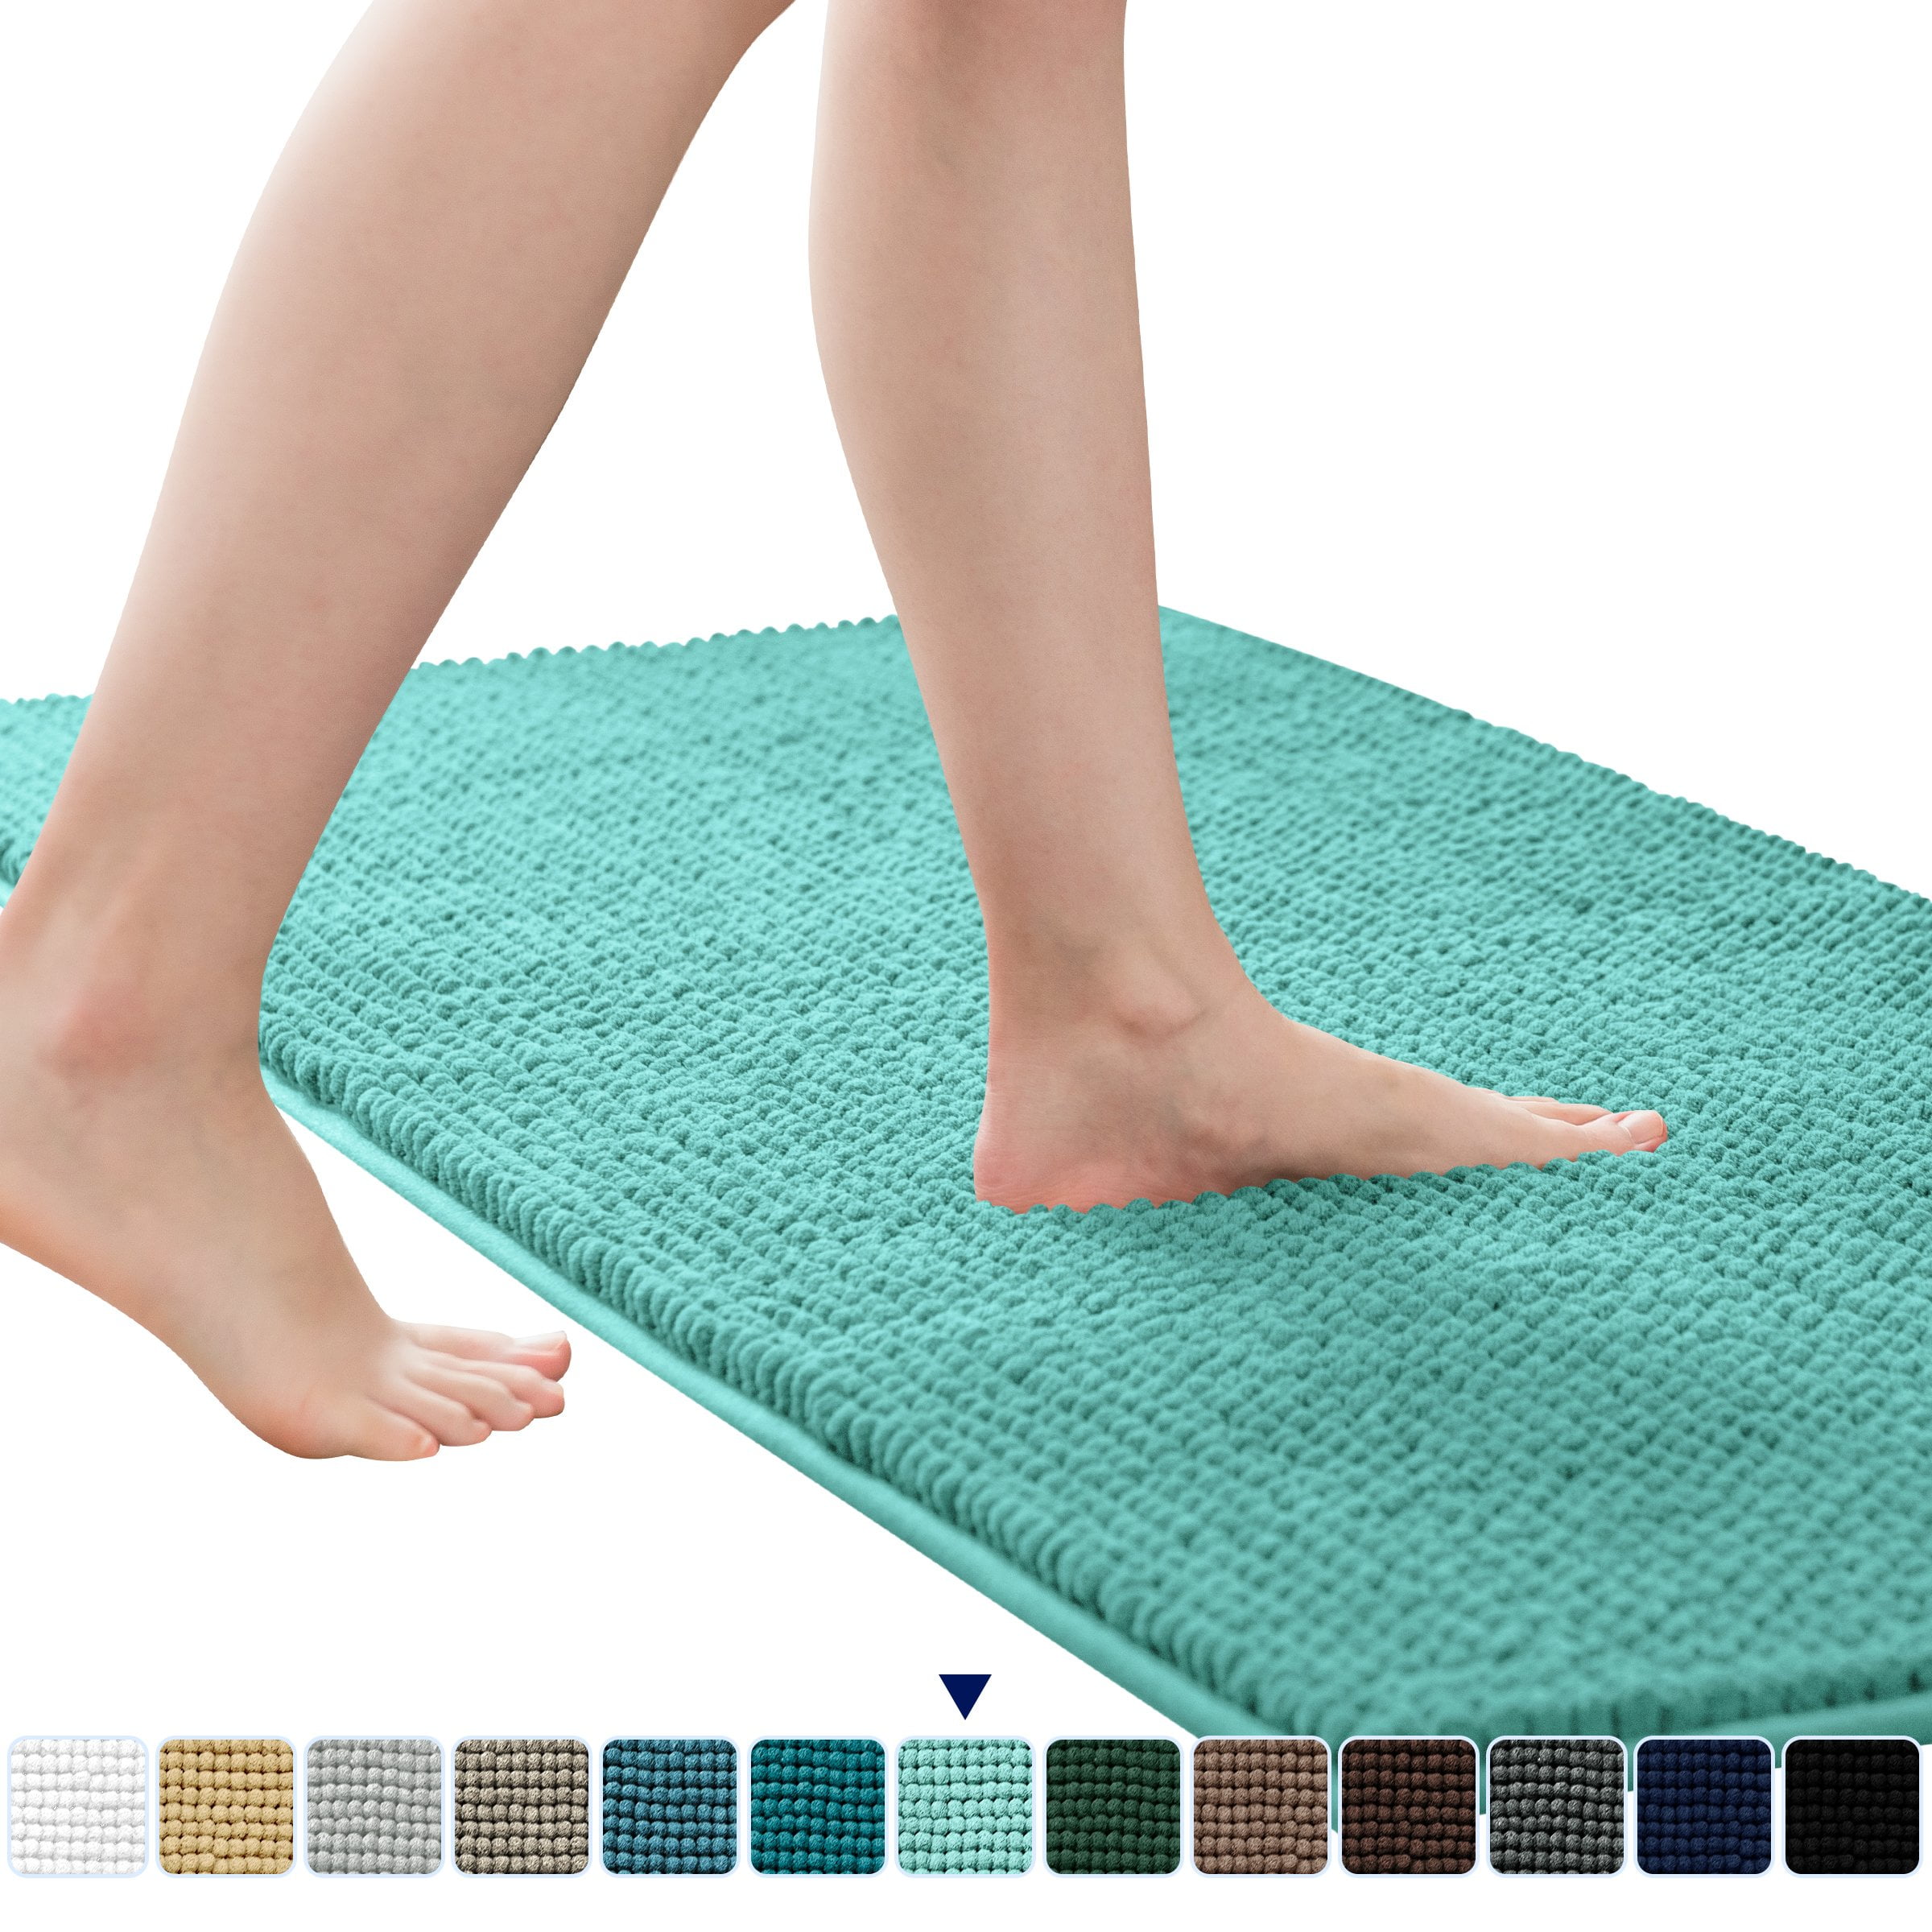 Yimobra Original Luxury Chenille Bathroom Rug Mat Runner Rugs 602 x 24 Inches Soft and Comfortable Large Size Super Absorbent and Thick Non-Slip Machi